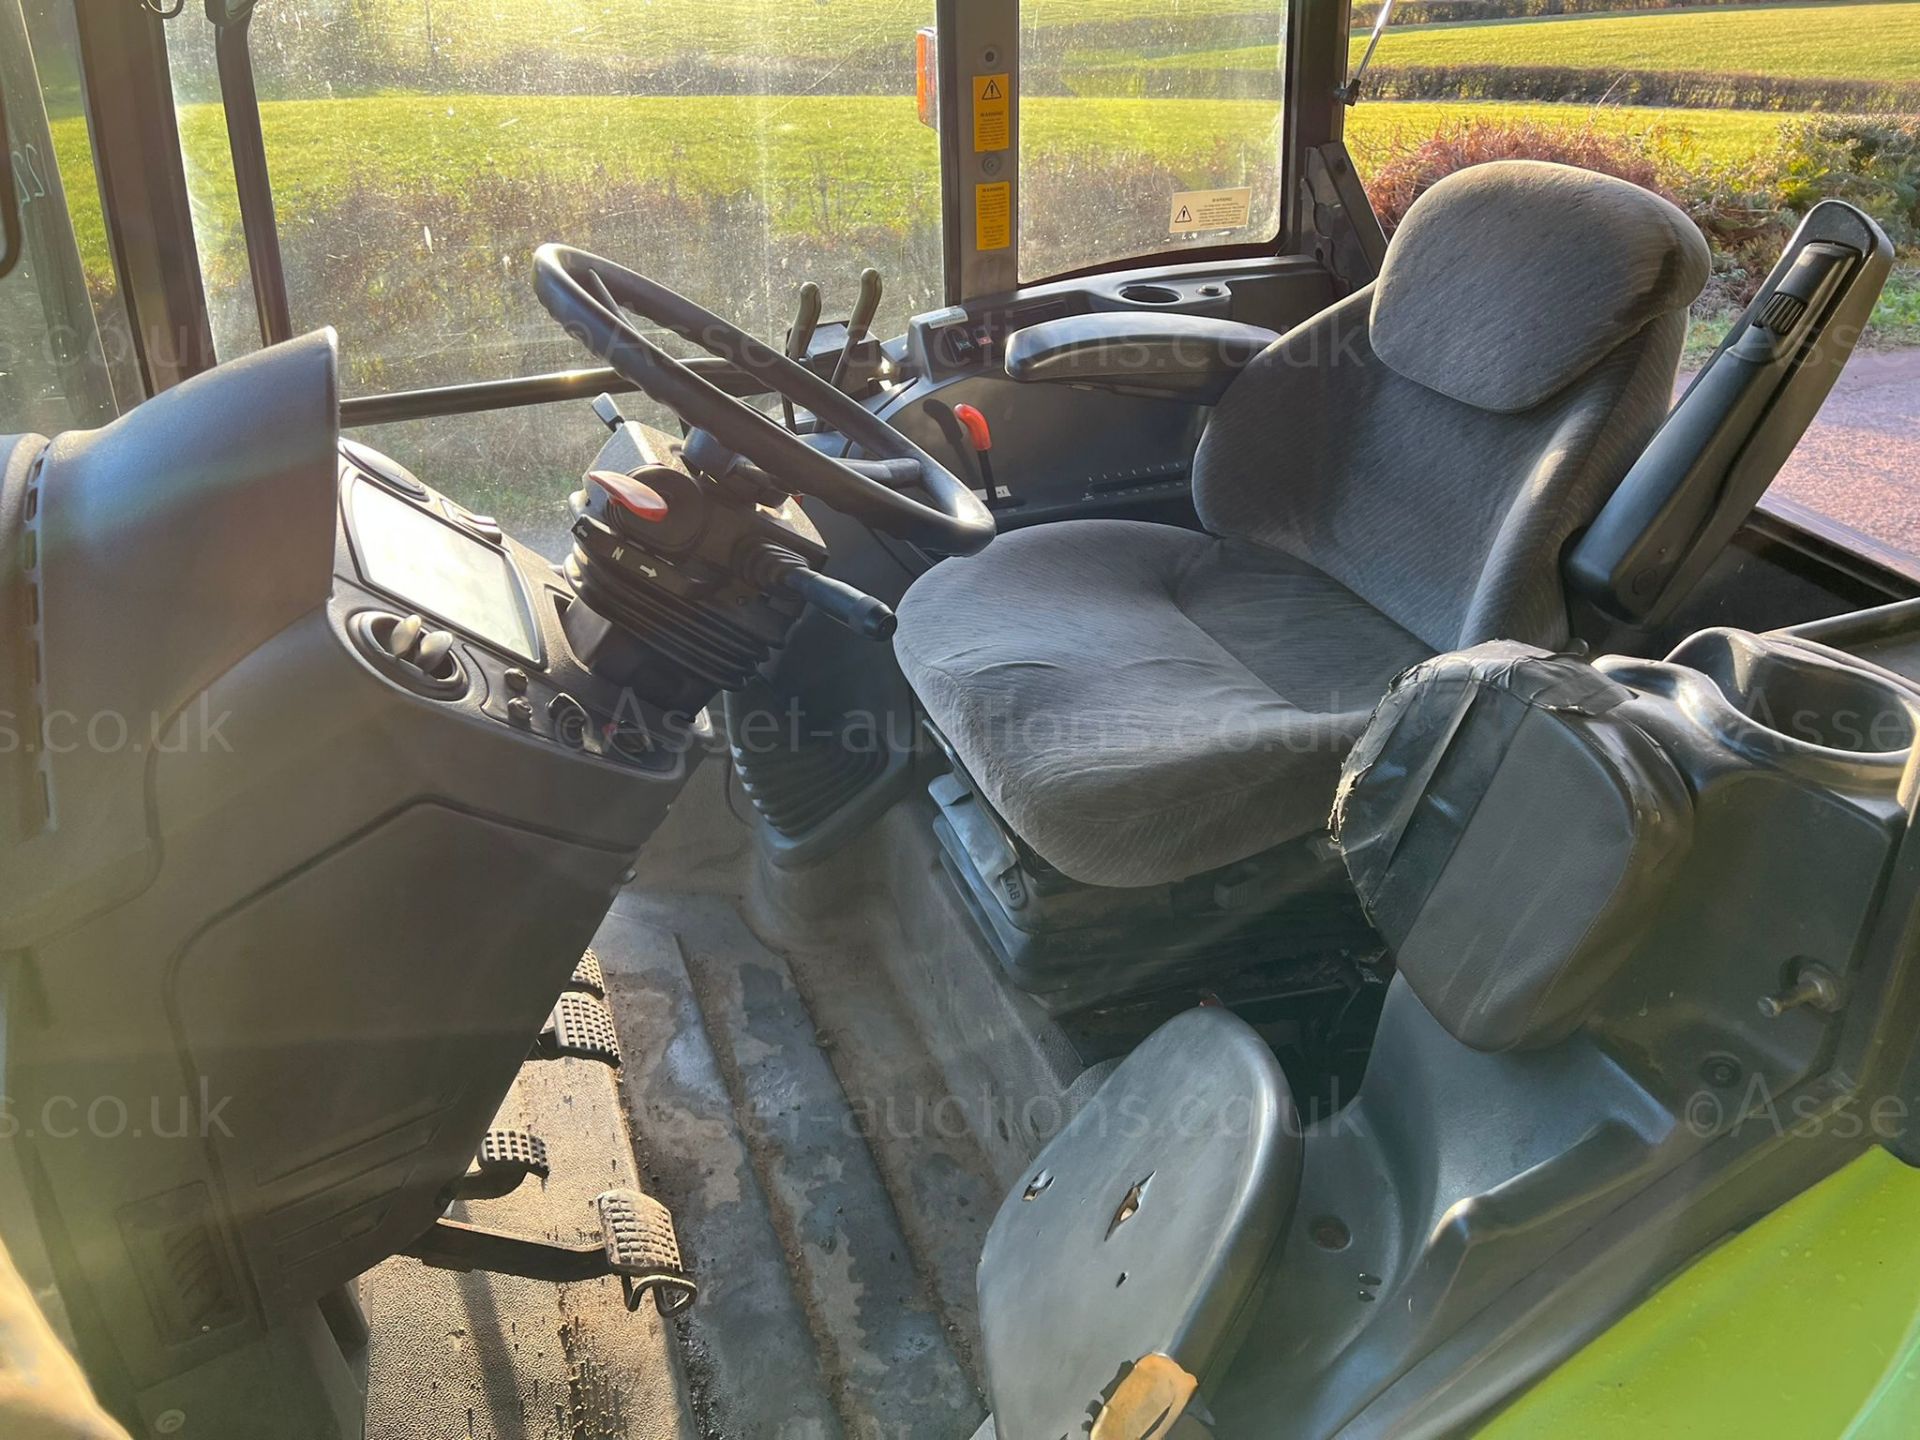 2006 CLAAS CLELTIS 426 RX 72hp 4WD TRACTOR, RUNS AND DRIVES, FULLY GLASS CAB, 7622 HOURS *PLUS VAT* - Image 13 of 14